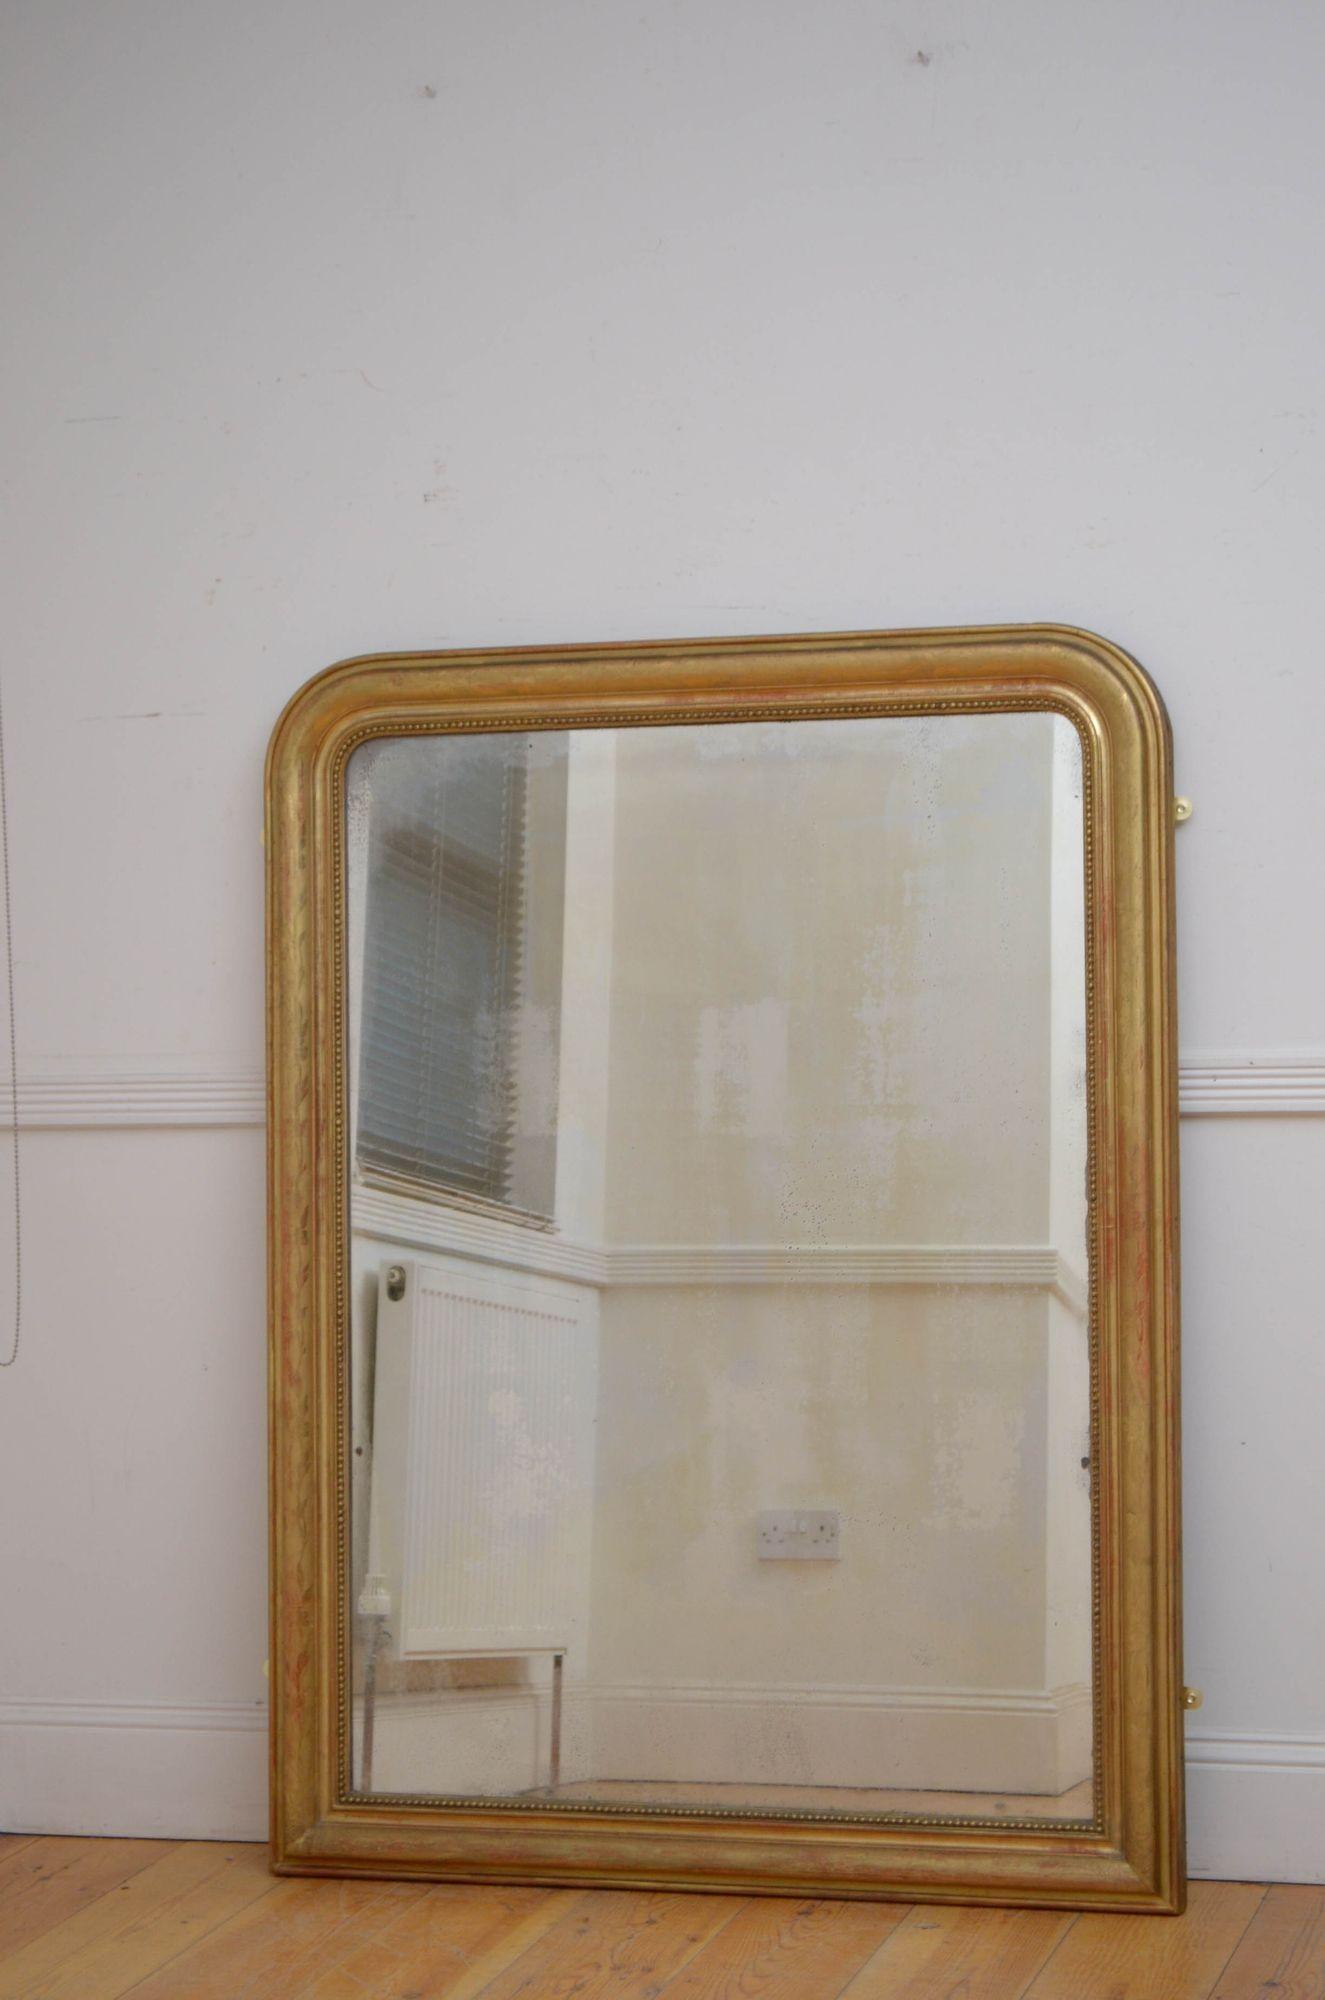 Sn5477 Attractive XIXth century gilt wall or pier mirror, having original glass with some imperfections, in beaded and moulded frame with floral decoration throughout. This antique mirror retains its original glass, original gilt and original